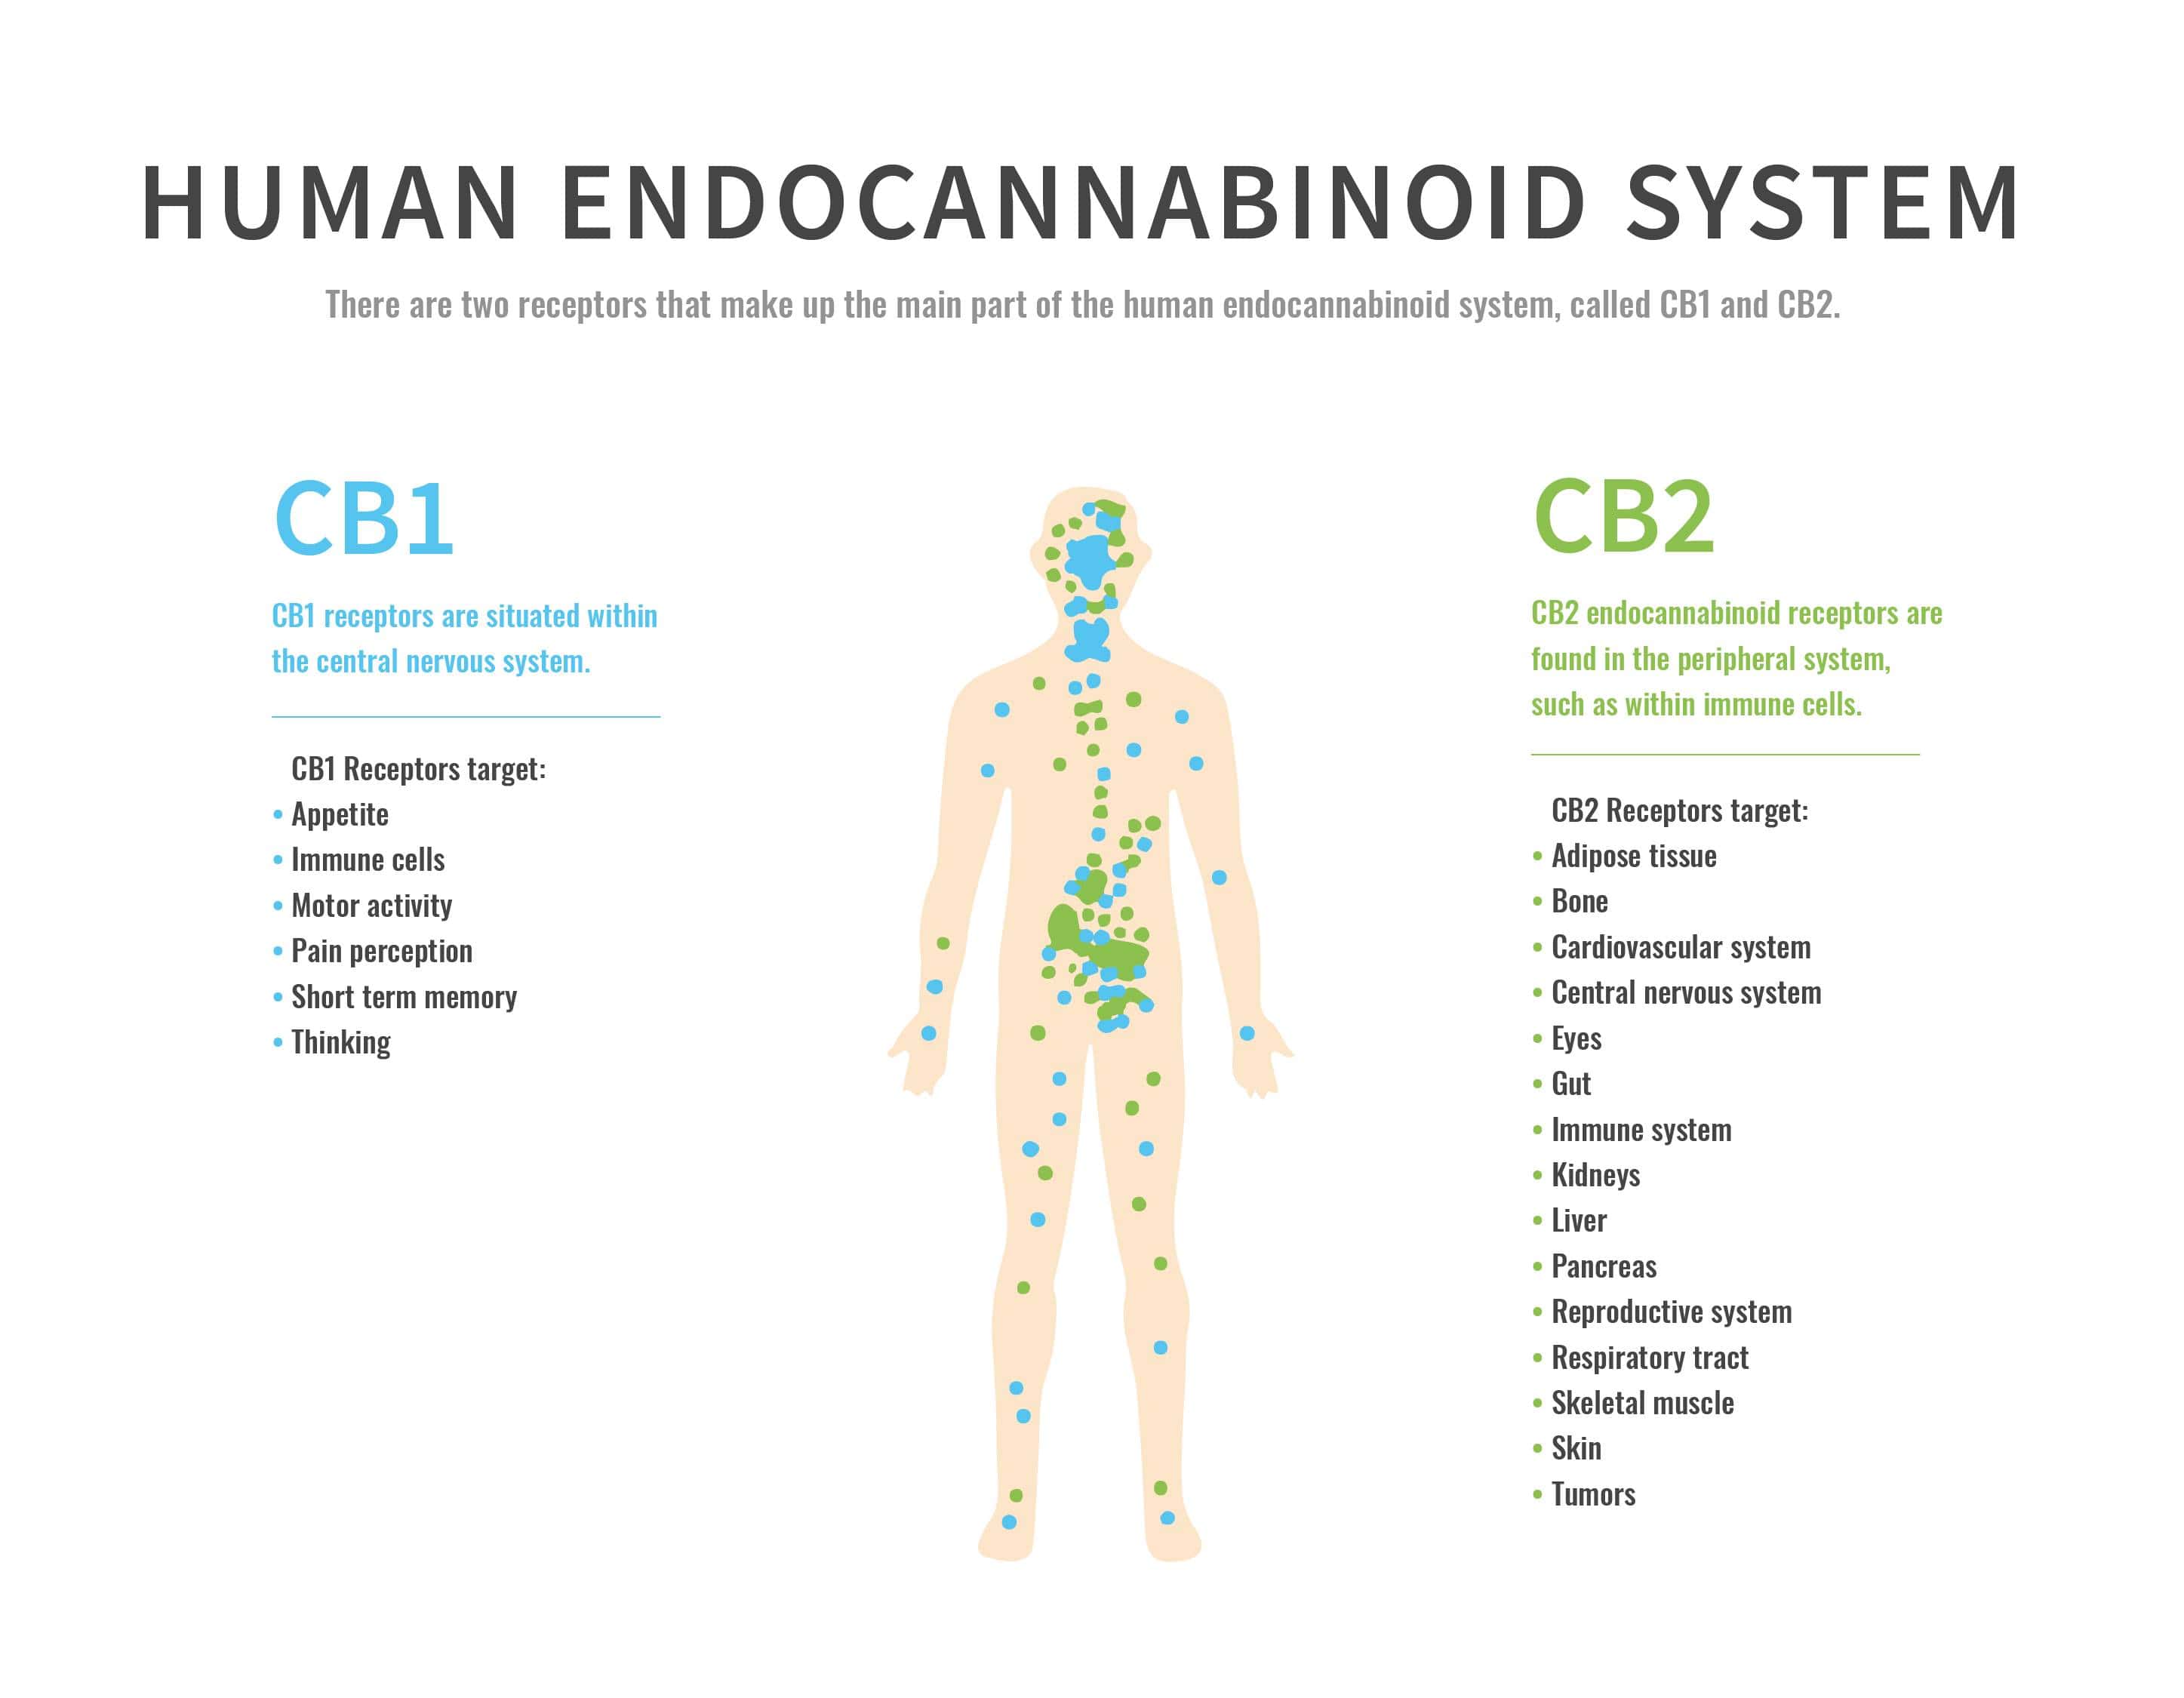 Endocannabinoid System and CB1 and CB2 Receptors